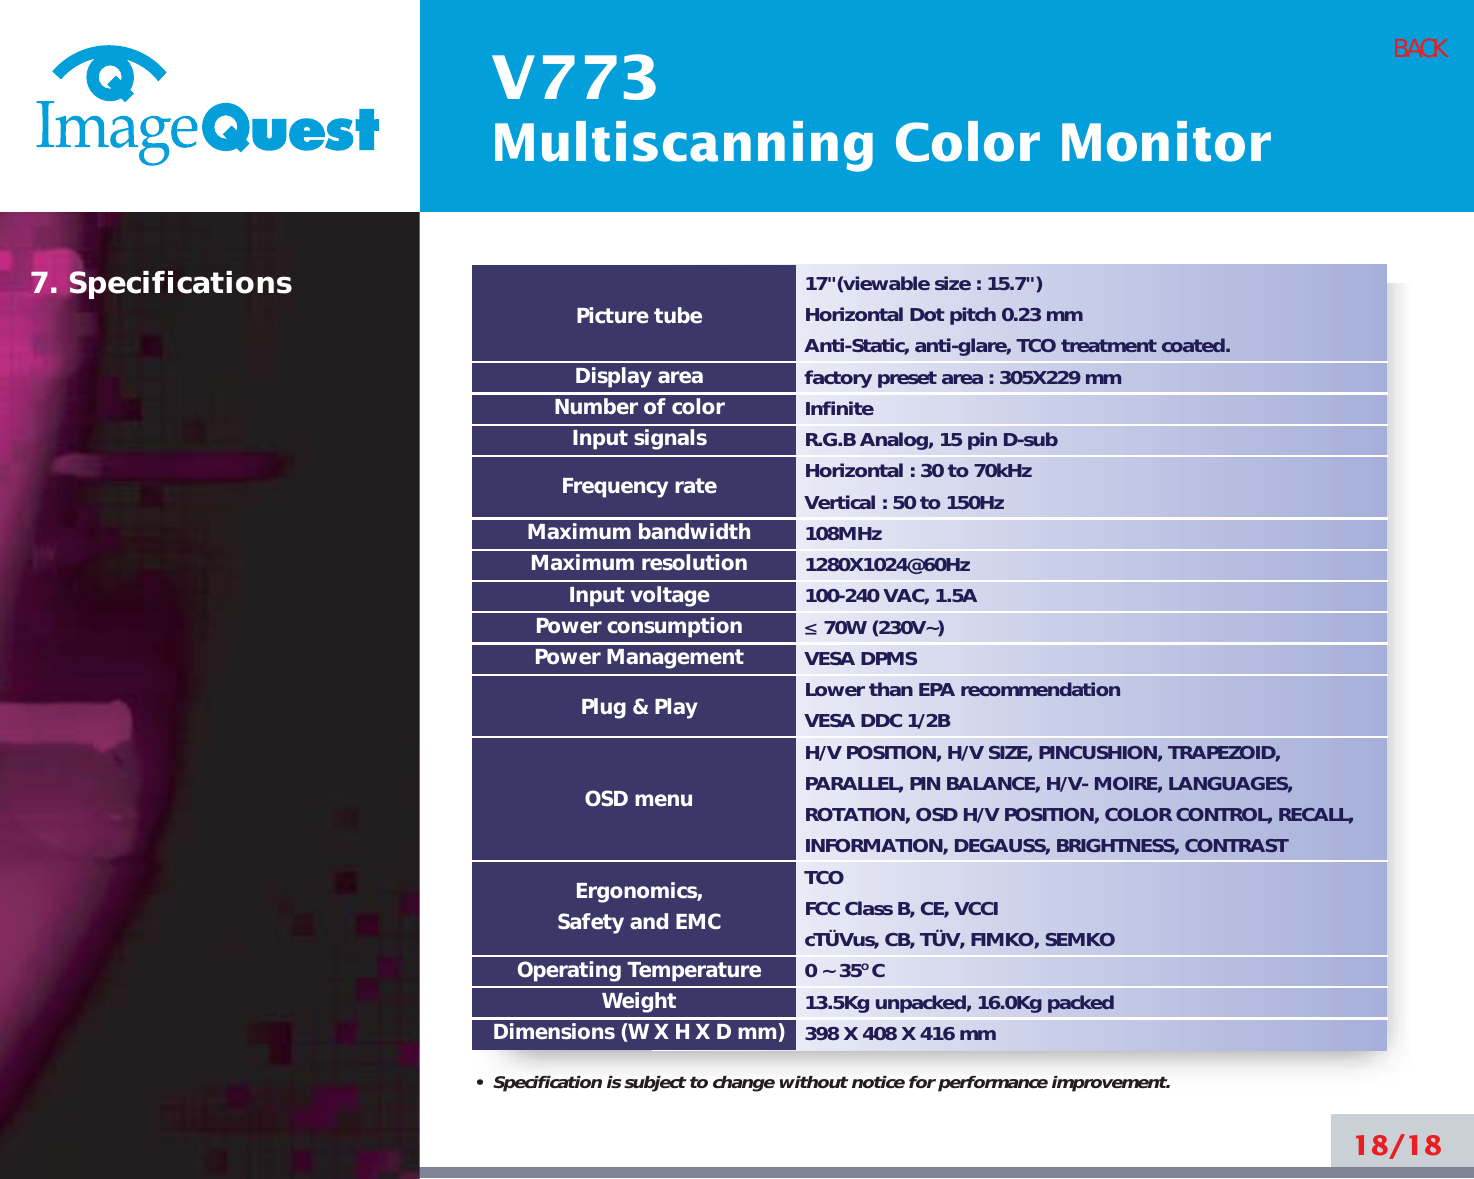 V773Multiscanning Color Monitor18/18BACK17&quot;(viewable size : 15.7&quot;)Horizontal Dot pitch 0.23 mmAnti-Static, anti-glare, TCO treatment coated.factory preset area : 305X229 mm InfiniteR.G.B Analog, 15 pin D-subHorizontal : 30 to 70kHzVertical : 50 to 150Hz108MHz1280X1024@60Hz100-240 VAC, 1.5A ≤70W (230V~)VESA DPMSLower than EPA recommendationVESA DDC 1/2BH/V POSITION, H/V SIZE, PINCUSHION, TRAPEZOID,PARALLEL, PIN BALANCE, H/V- MOIRE, LANGUAGES,ROTATION, OSD H/V POSITION, COLOR CONTROL, RECALL,INFORMATION, DEGAUSS, BRIGHTNESS, CONTRASTTCO FCC Class B, CE, VCCIcTÜVus, CB, TÜV, FIMKO, SEMKO0 ~ 35O C13.5Kg unpacked, 16.0Kg packed398 X 408 X 416 mmPicture tubeDisplay areaNumber of colorInput signalsFrequency rateMaximum bandwidthMaximum resolutionInput voltagePower consumptionPower ManagementPlug &amp; PlayOSD menuErgonomics,Safety and EMCOperating TemperatureWeightDimensions (W X H X D mm)•  Specification is subject to change without notice for performance improvement.7. Specifications